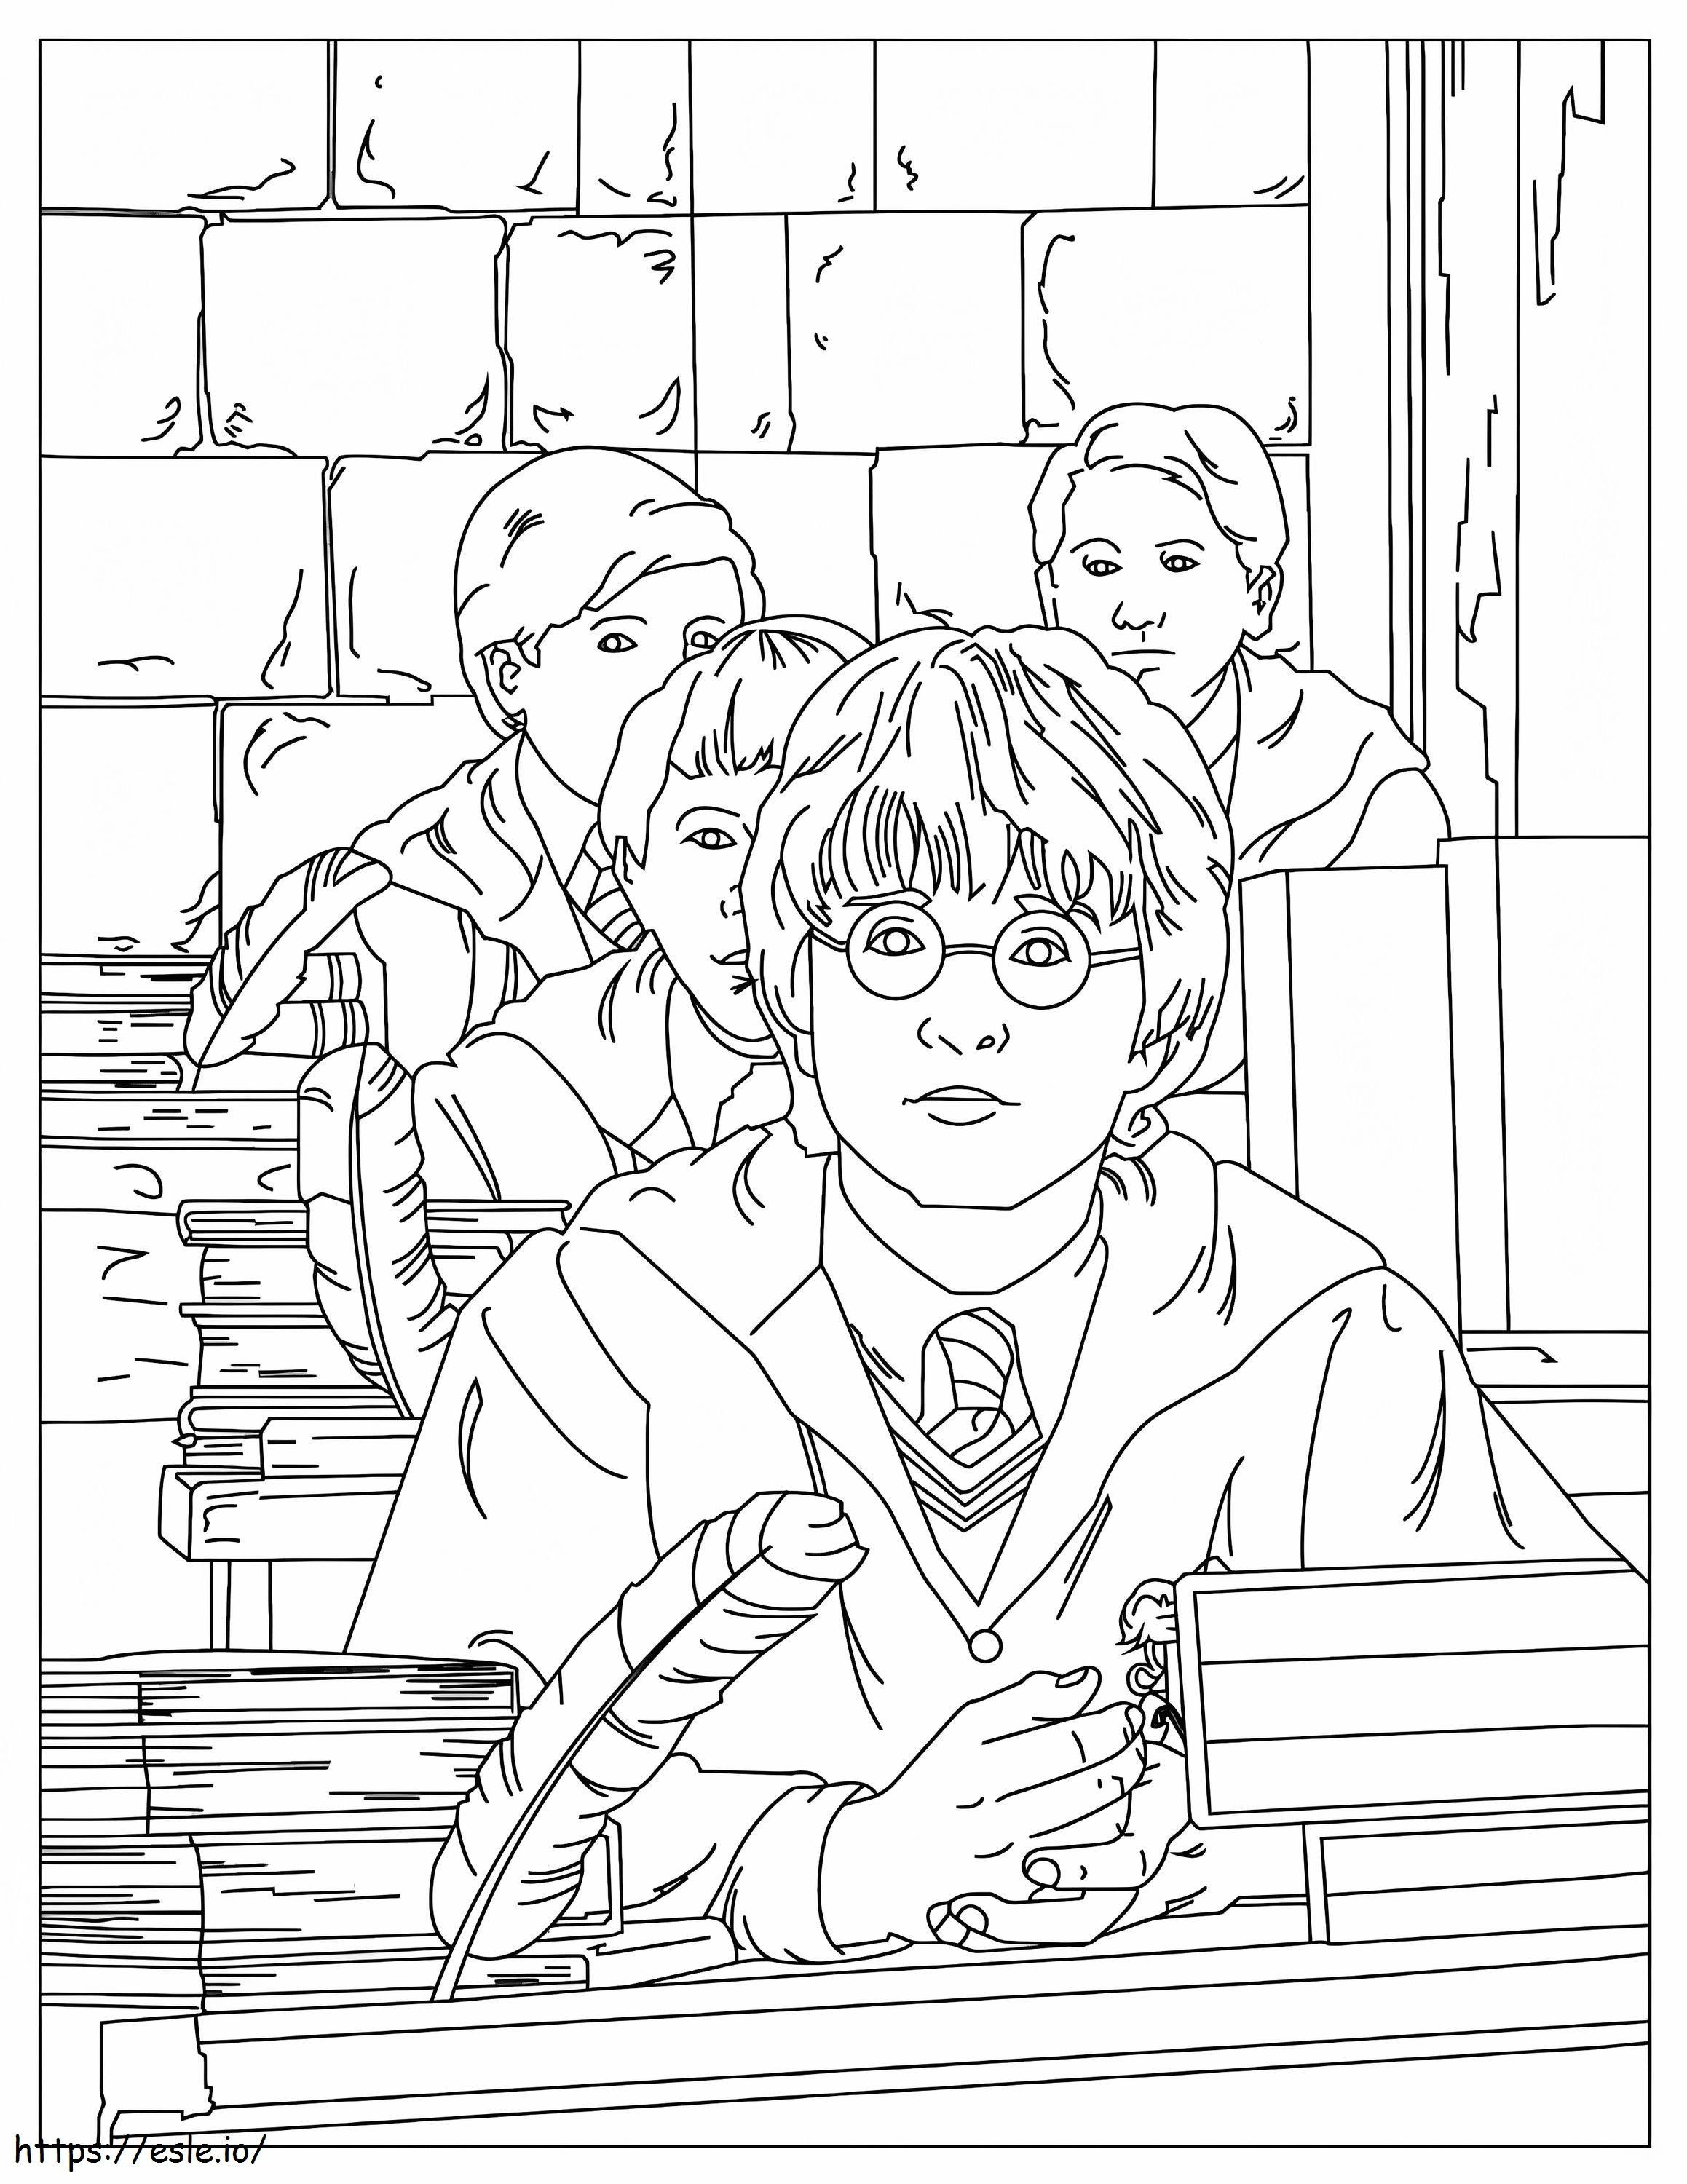 Harry Potter In Classroom coloring page